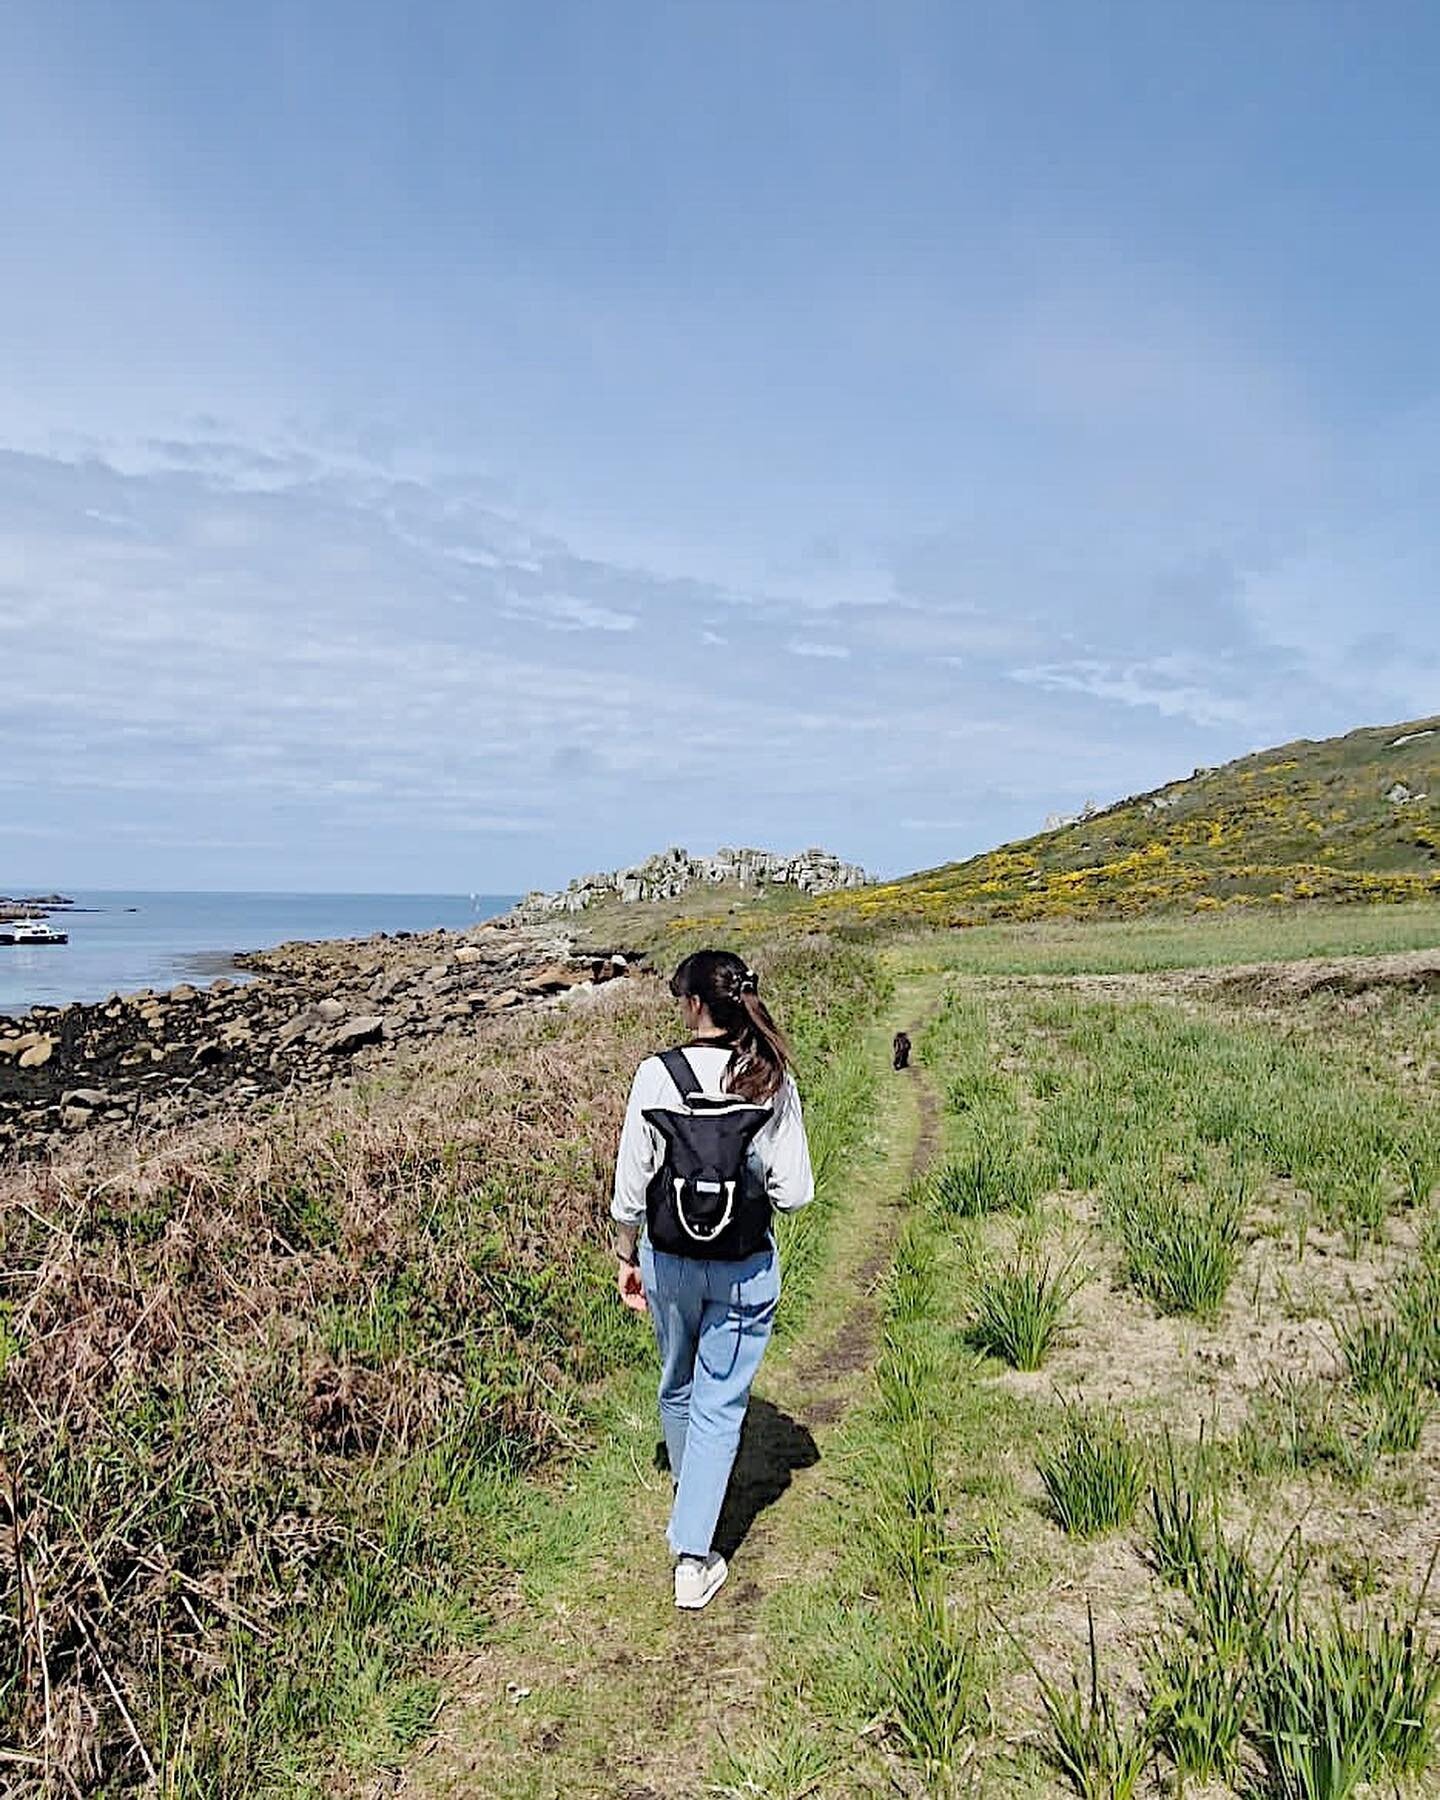 TRAVEL TUESDAY | EXPLORING St Agnes 🌊🌿

Such a gorgeous sunny day exploring St Agnes and Gough - a tidal island joined by a sand bar 〰️ 
St Agnes is an incredibly peaceful and inimitably pretty island with the clearest aqua waters and the whitest s